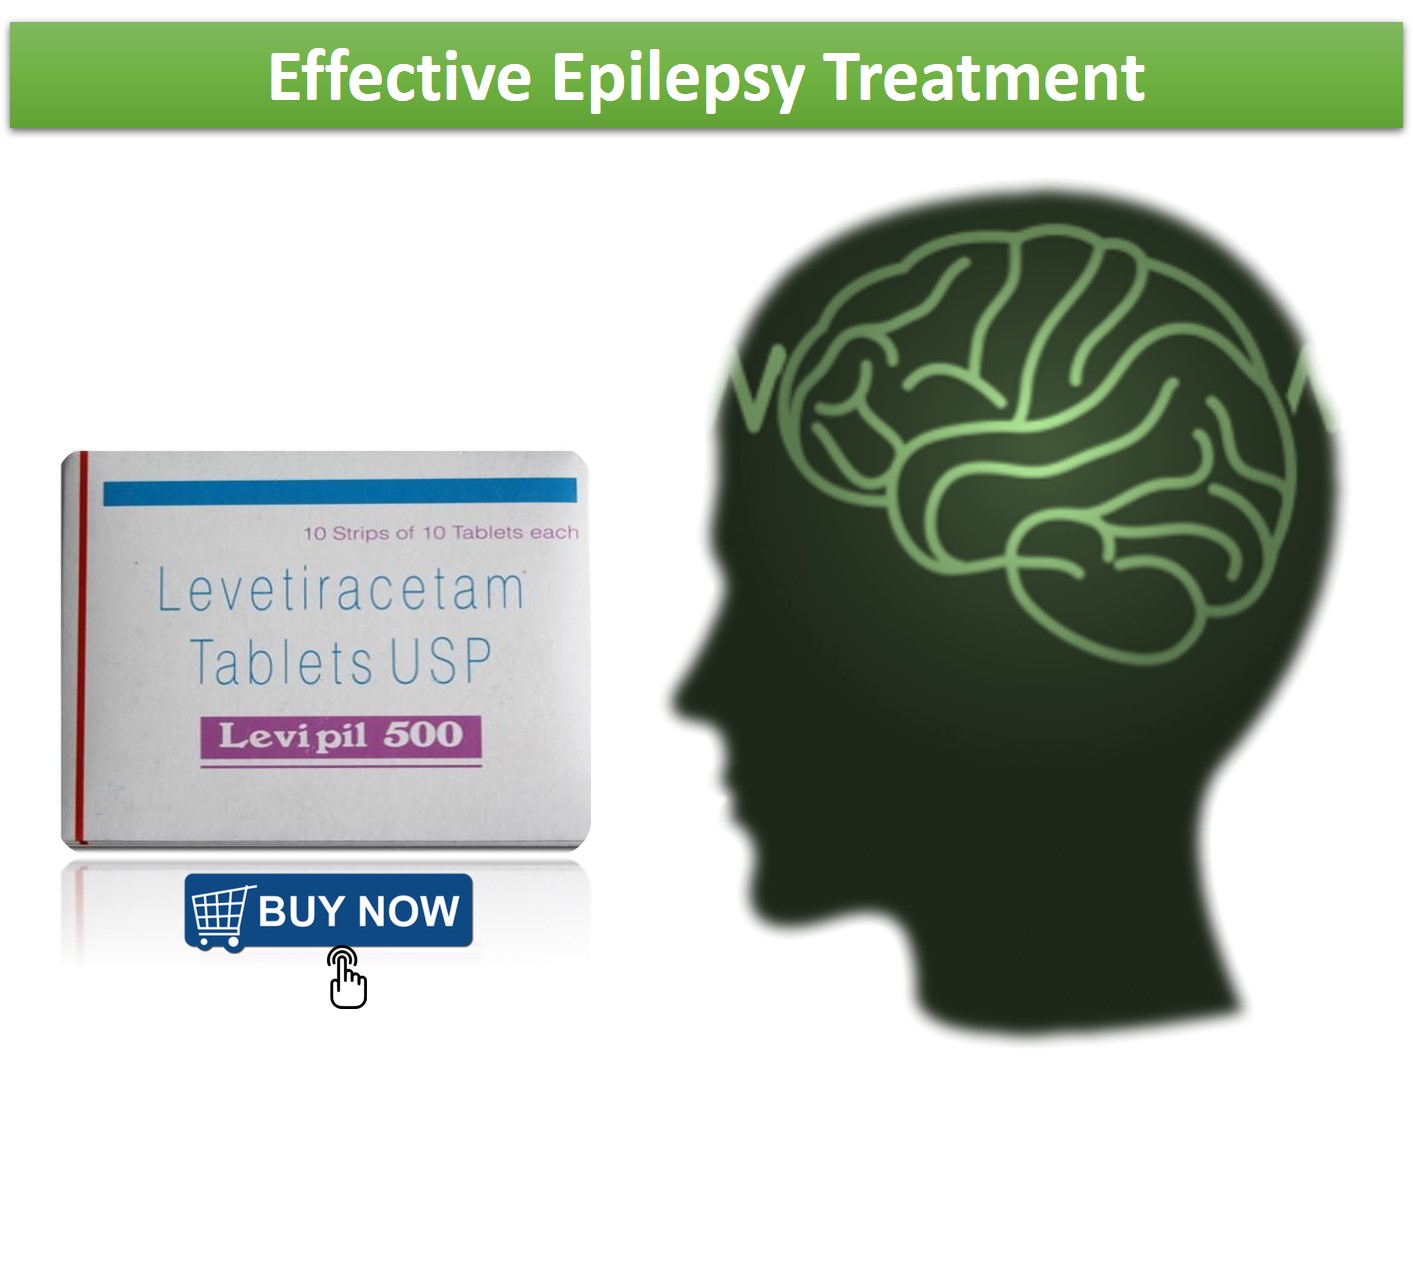 Is Epilepsy a Disorder of the Nervous System